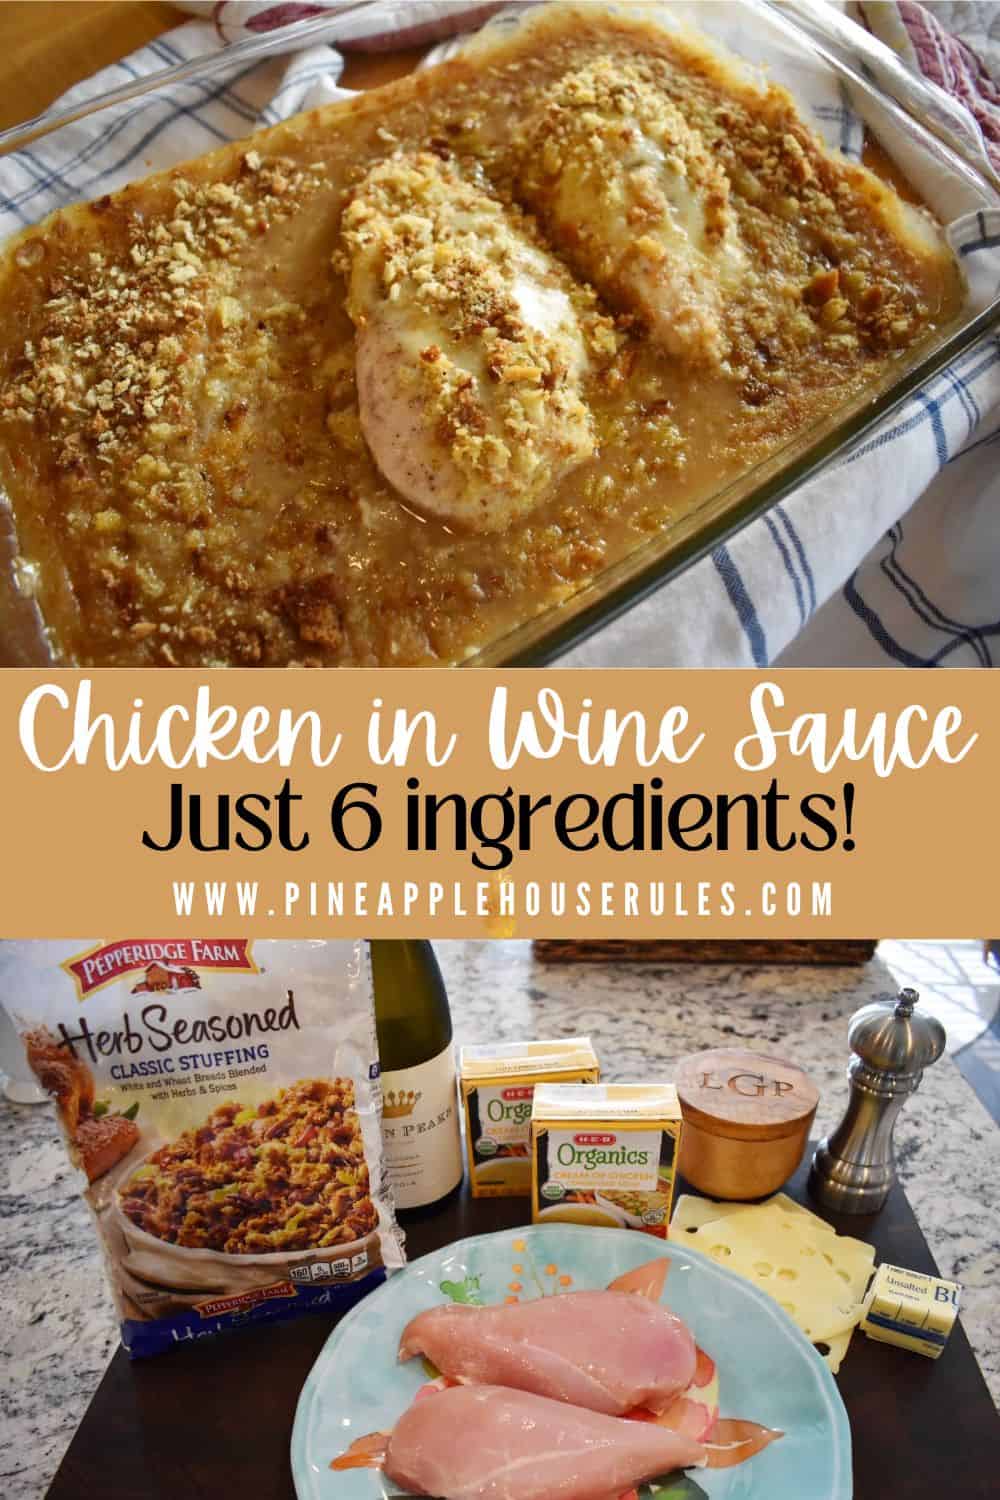 Chicken in Wine Sauce is an easy dinner recipe for busy weeknights. Just build the casserole and pop in the oven! Chicken Recipes | Chicken Breast Recipes | Chicken Breast Recipes Oven | Chicken Breast Recipes Easy | Chicken Breast Dinner Ideas | Casserole Recipes | Casserole Recipes for Dinner | Casserole Dishes | Cooking with Wine | Cooking with Wine Recipes | Easy Dinner Recipes | Easy Meals | Dinner Ideas | Dinner Recipes | Dinner Ideas Easy